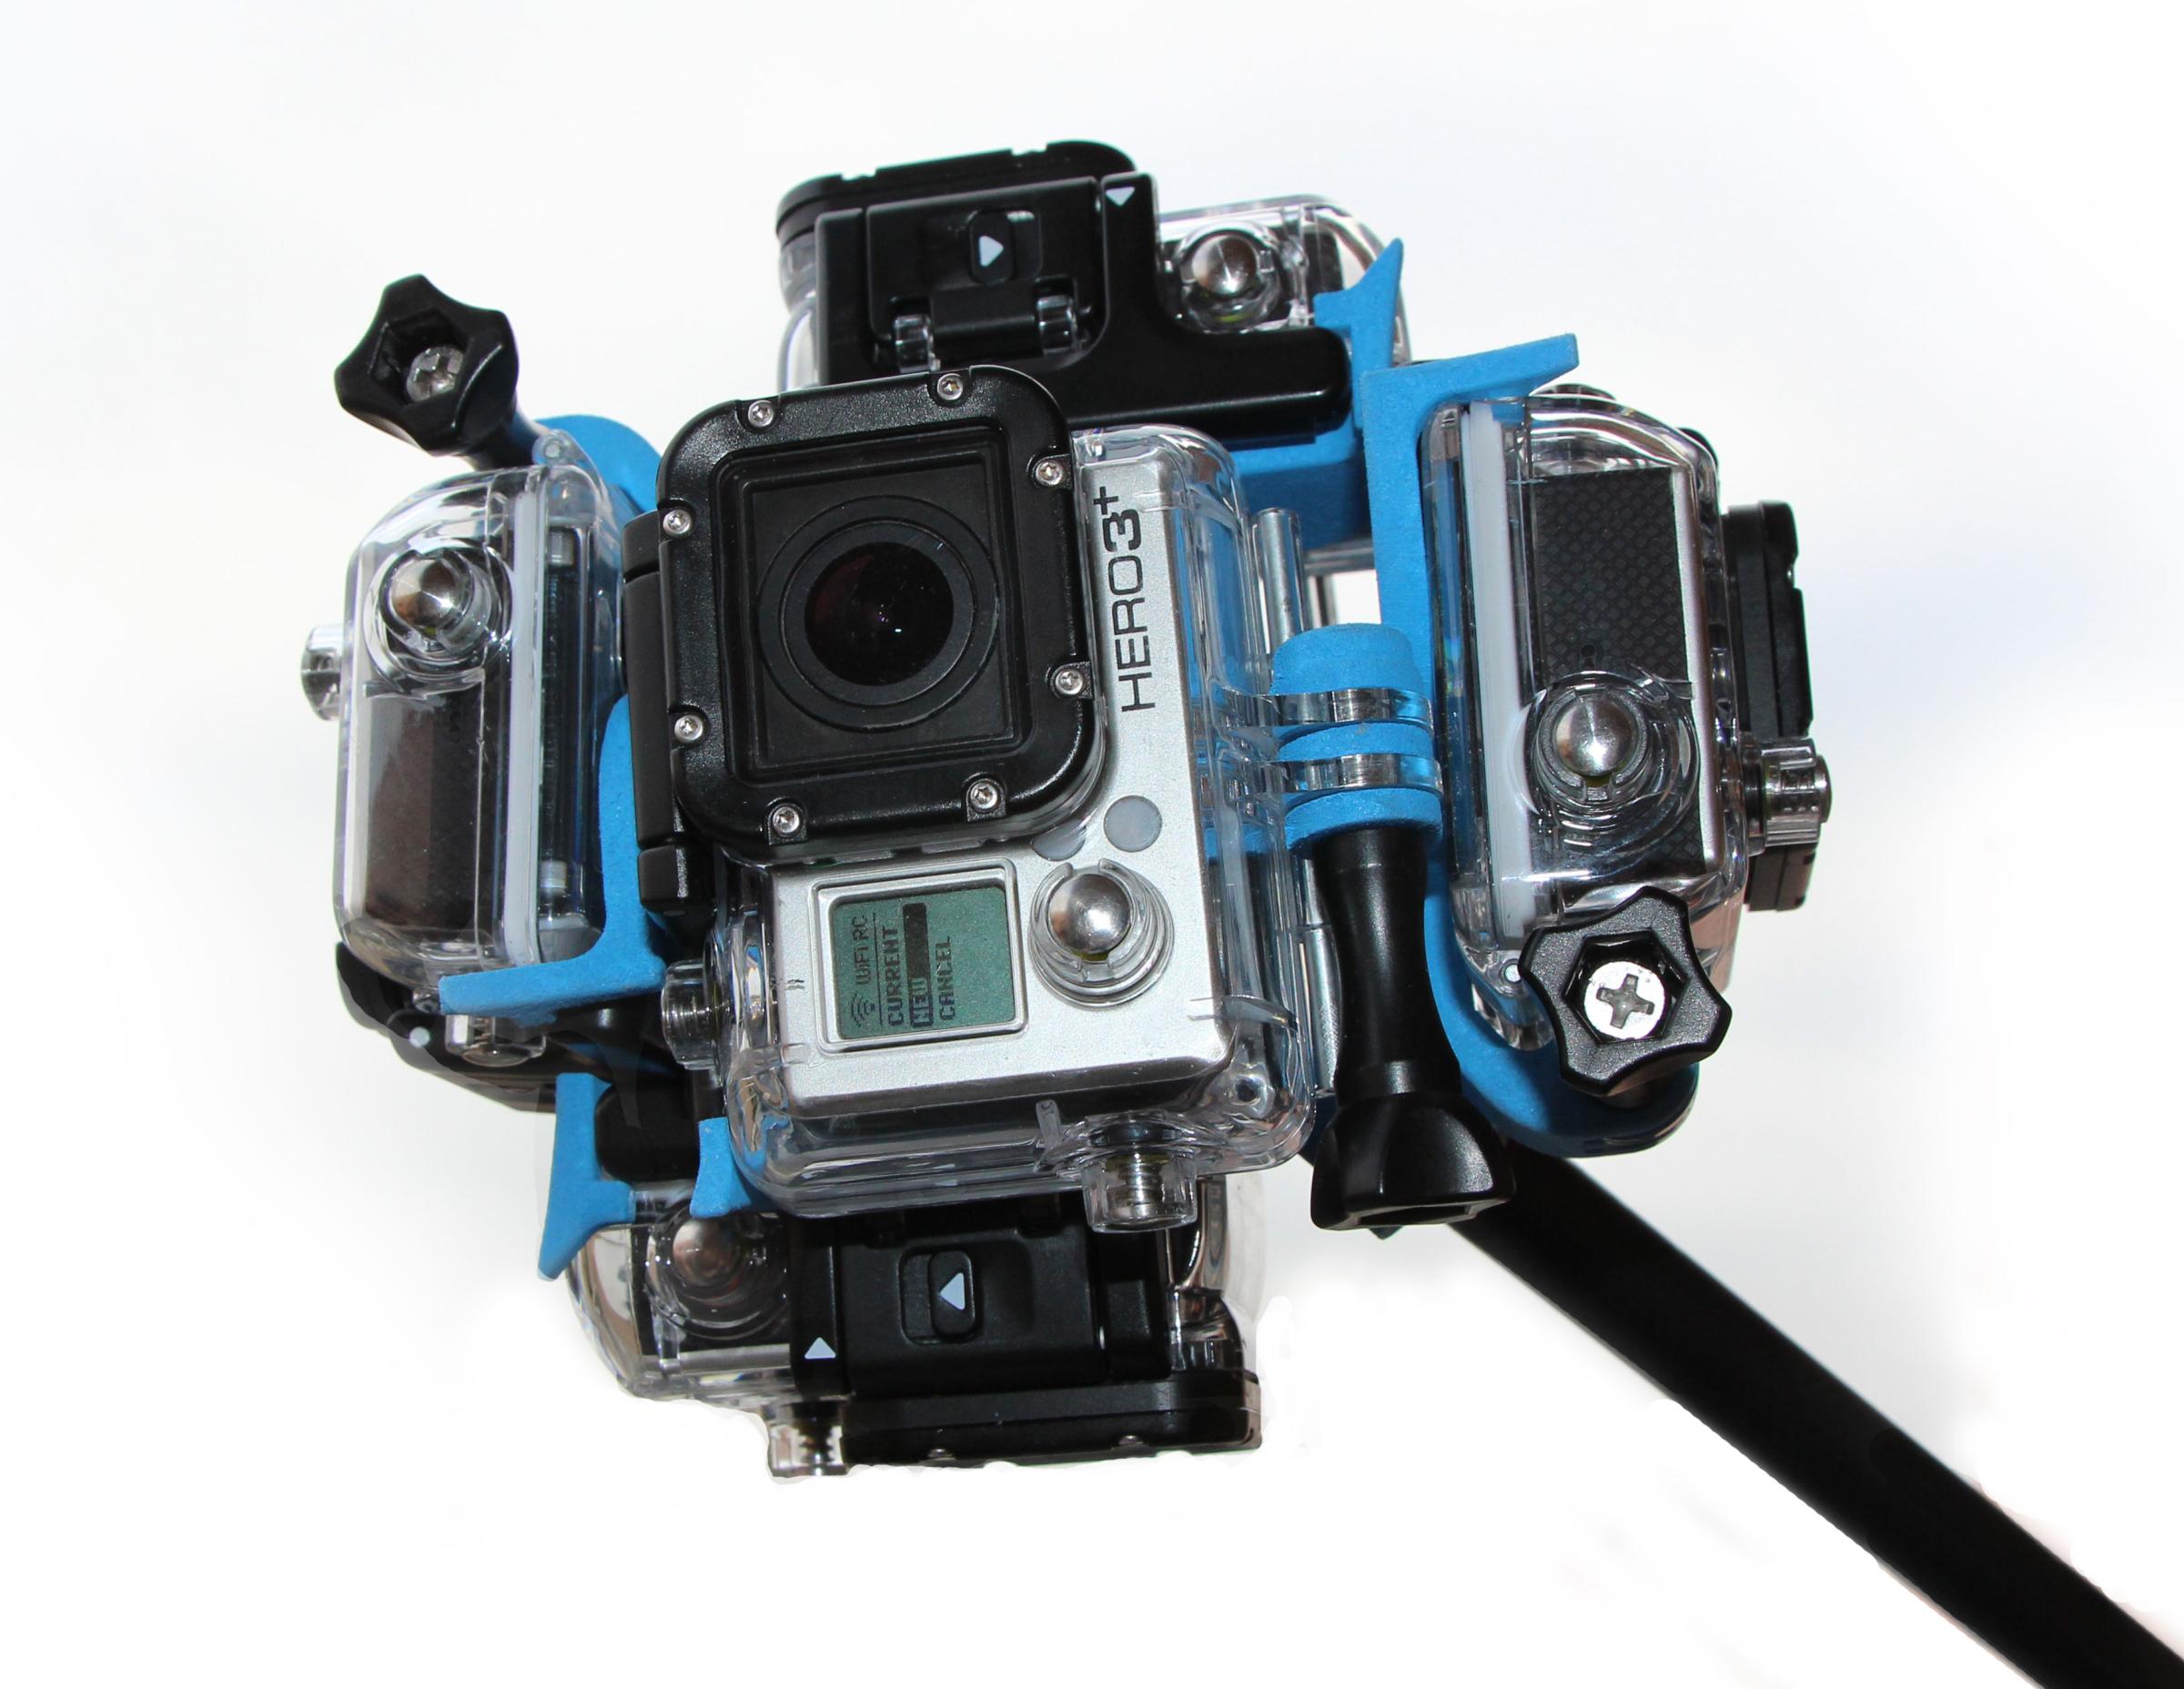 360Hero's forthcoming quick assembly scuba gear, with GoPro housing both the Hero3 and Hero3 Plus sytems